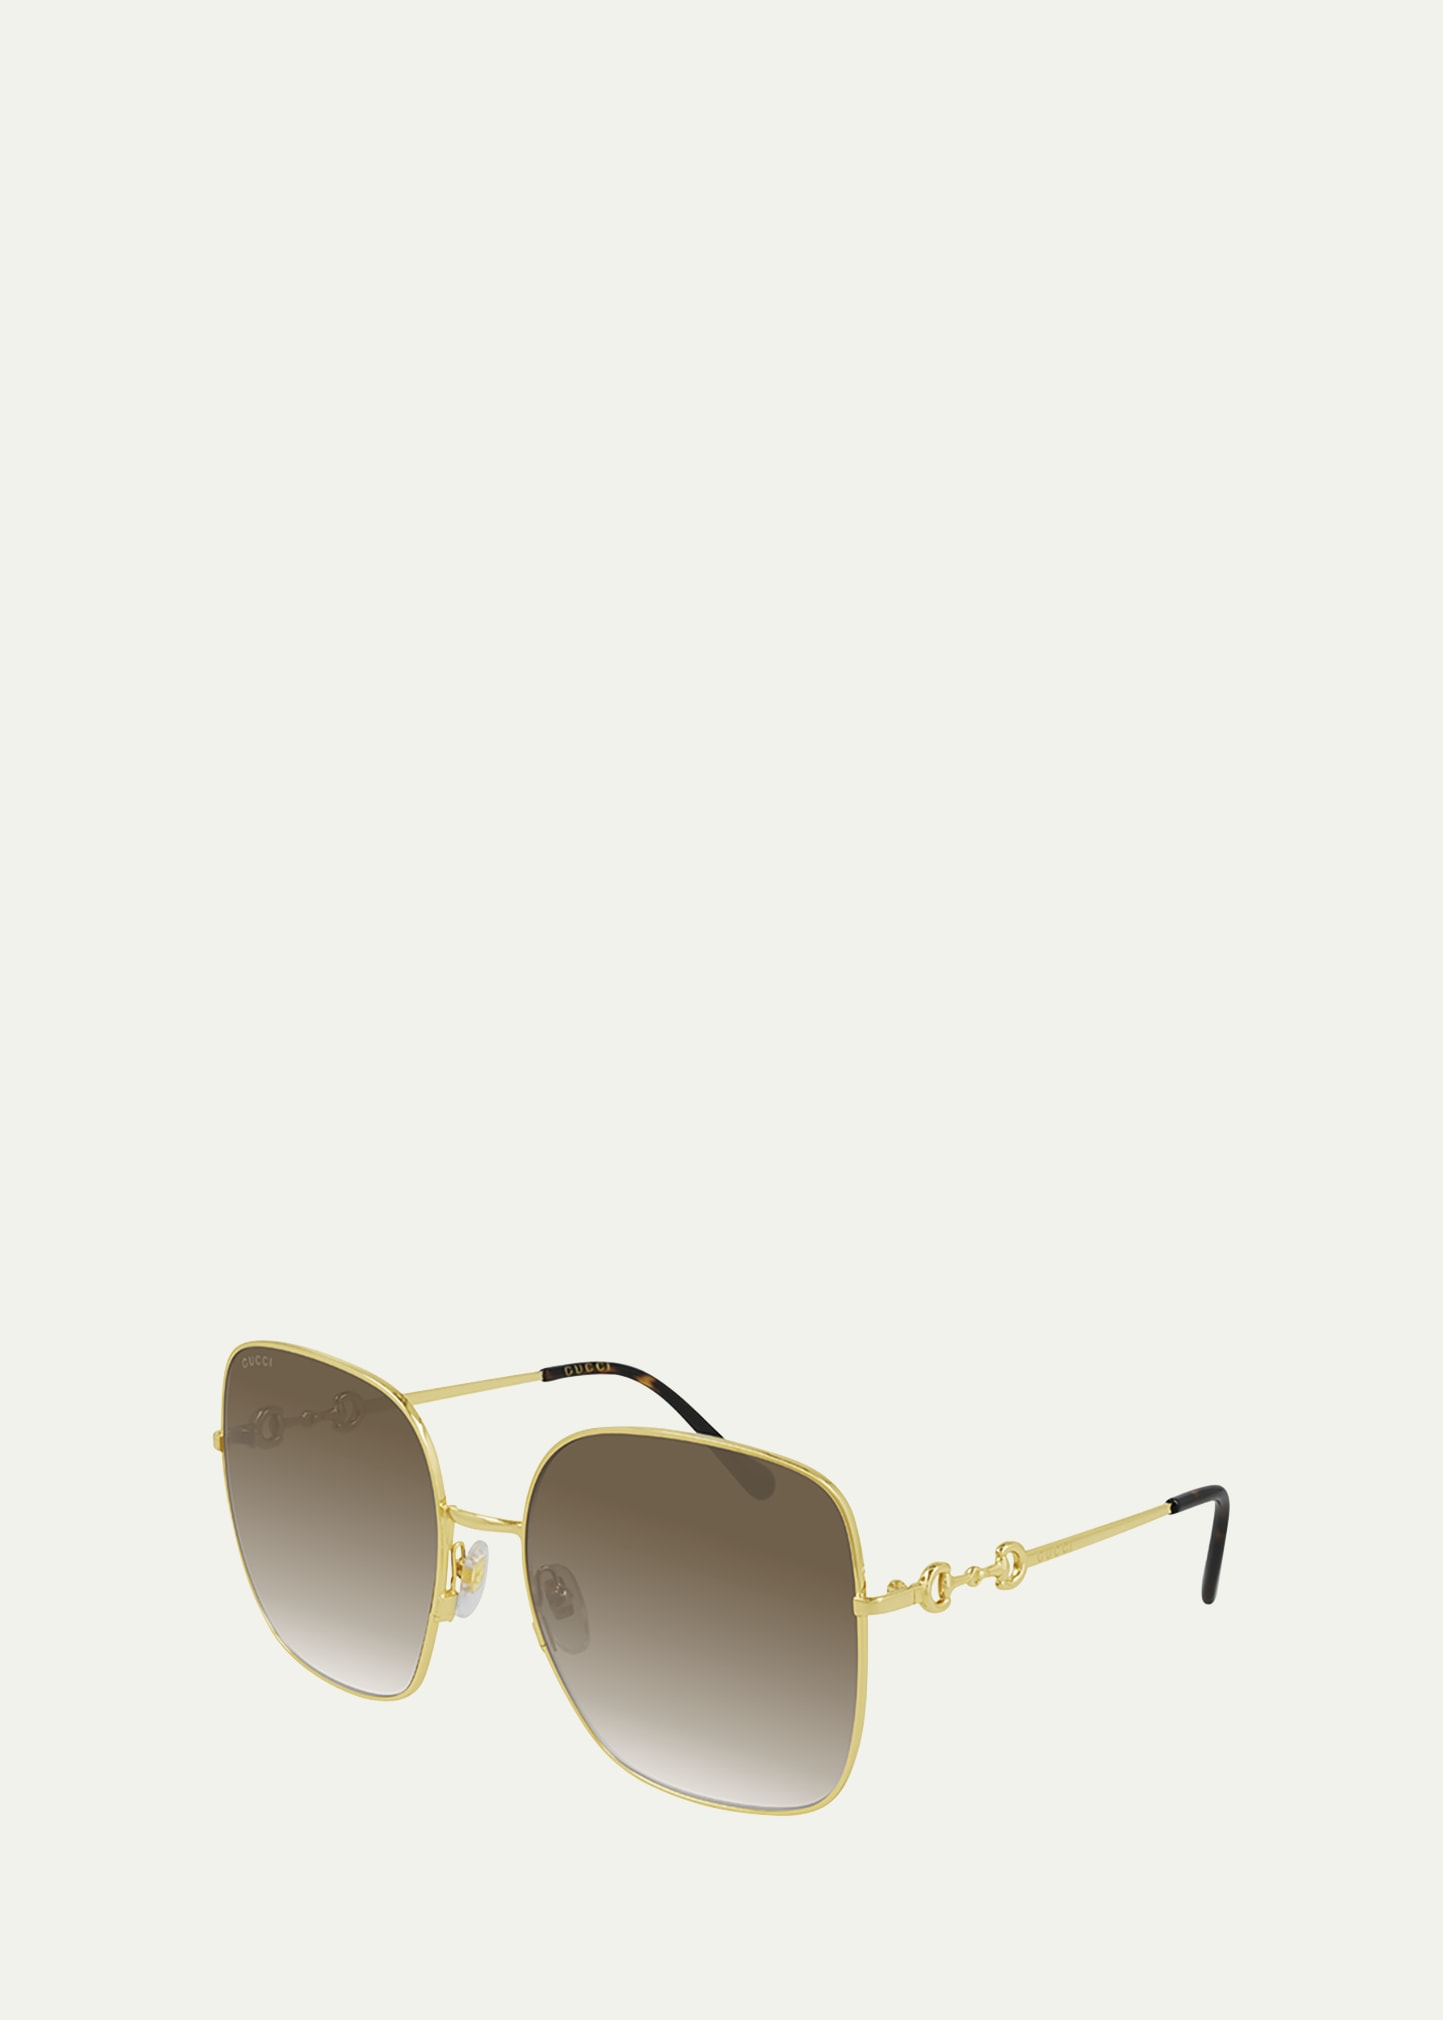 Gucci Oversized Square Metal Sunglasses In Brown / Gold